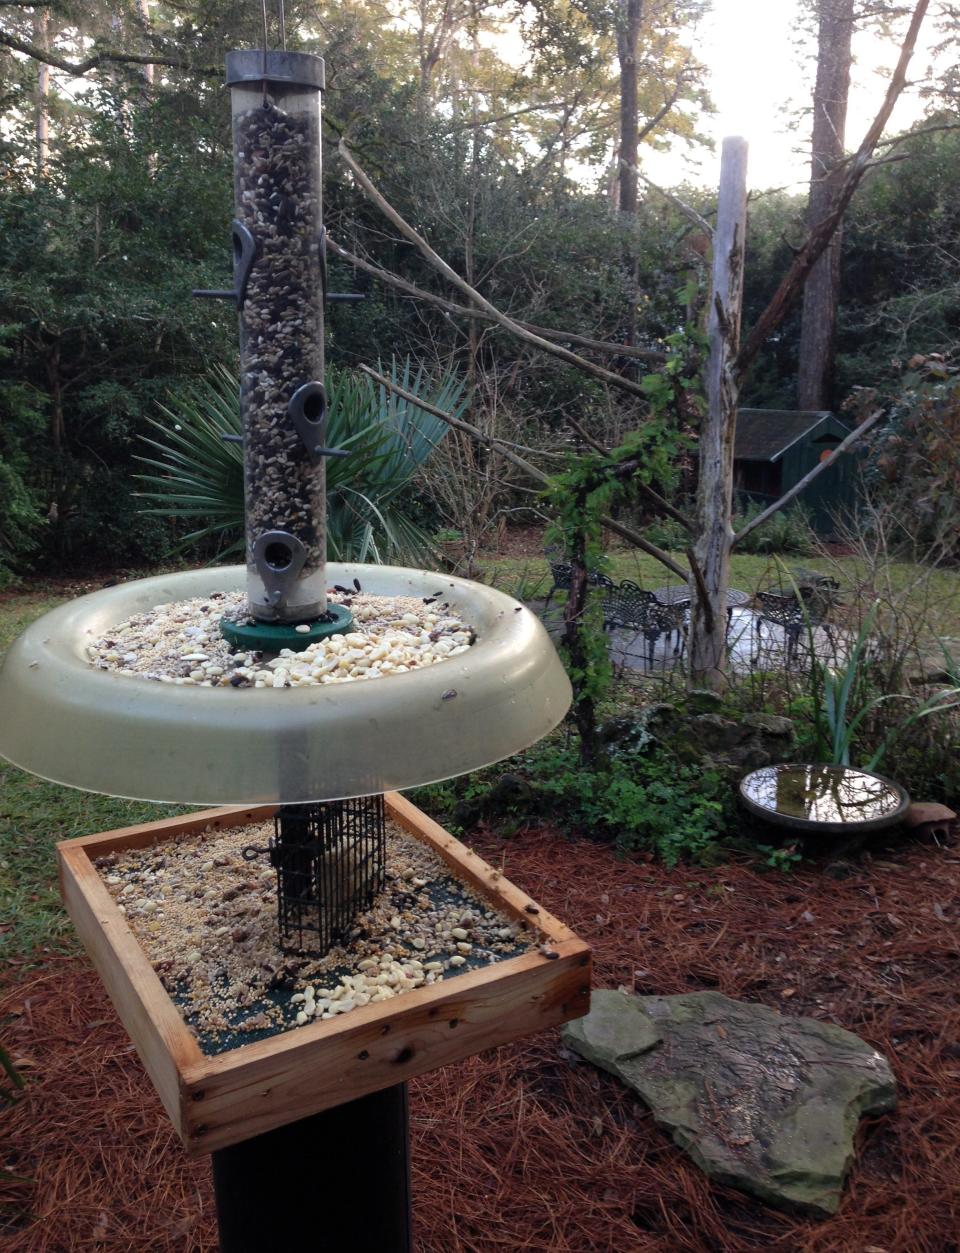 The author’s squirrel-proof feeder set up for winter feeding with white millet on the lower level for White-throated Sparrows and a variety of other seeds in the tube and on the top tray. Note the simple wire suet cage attached to the pole.